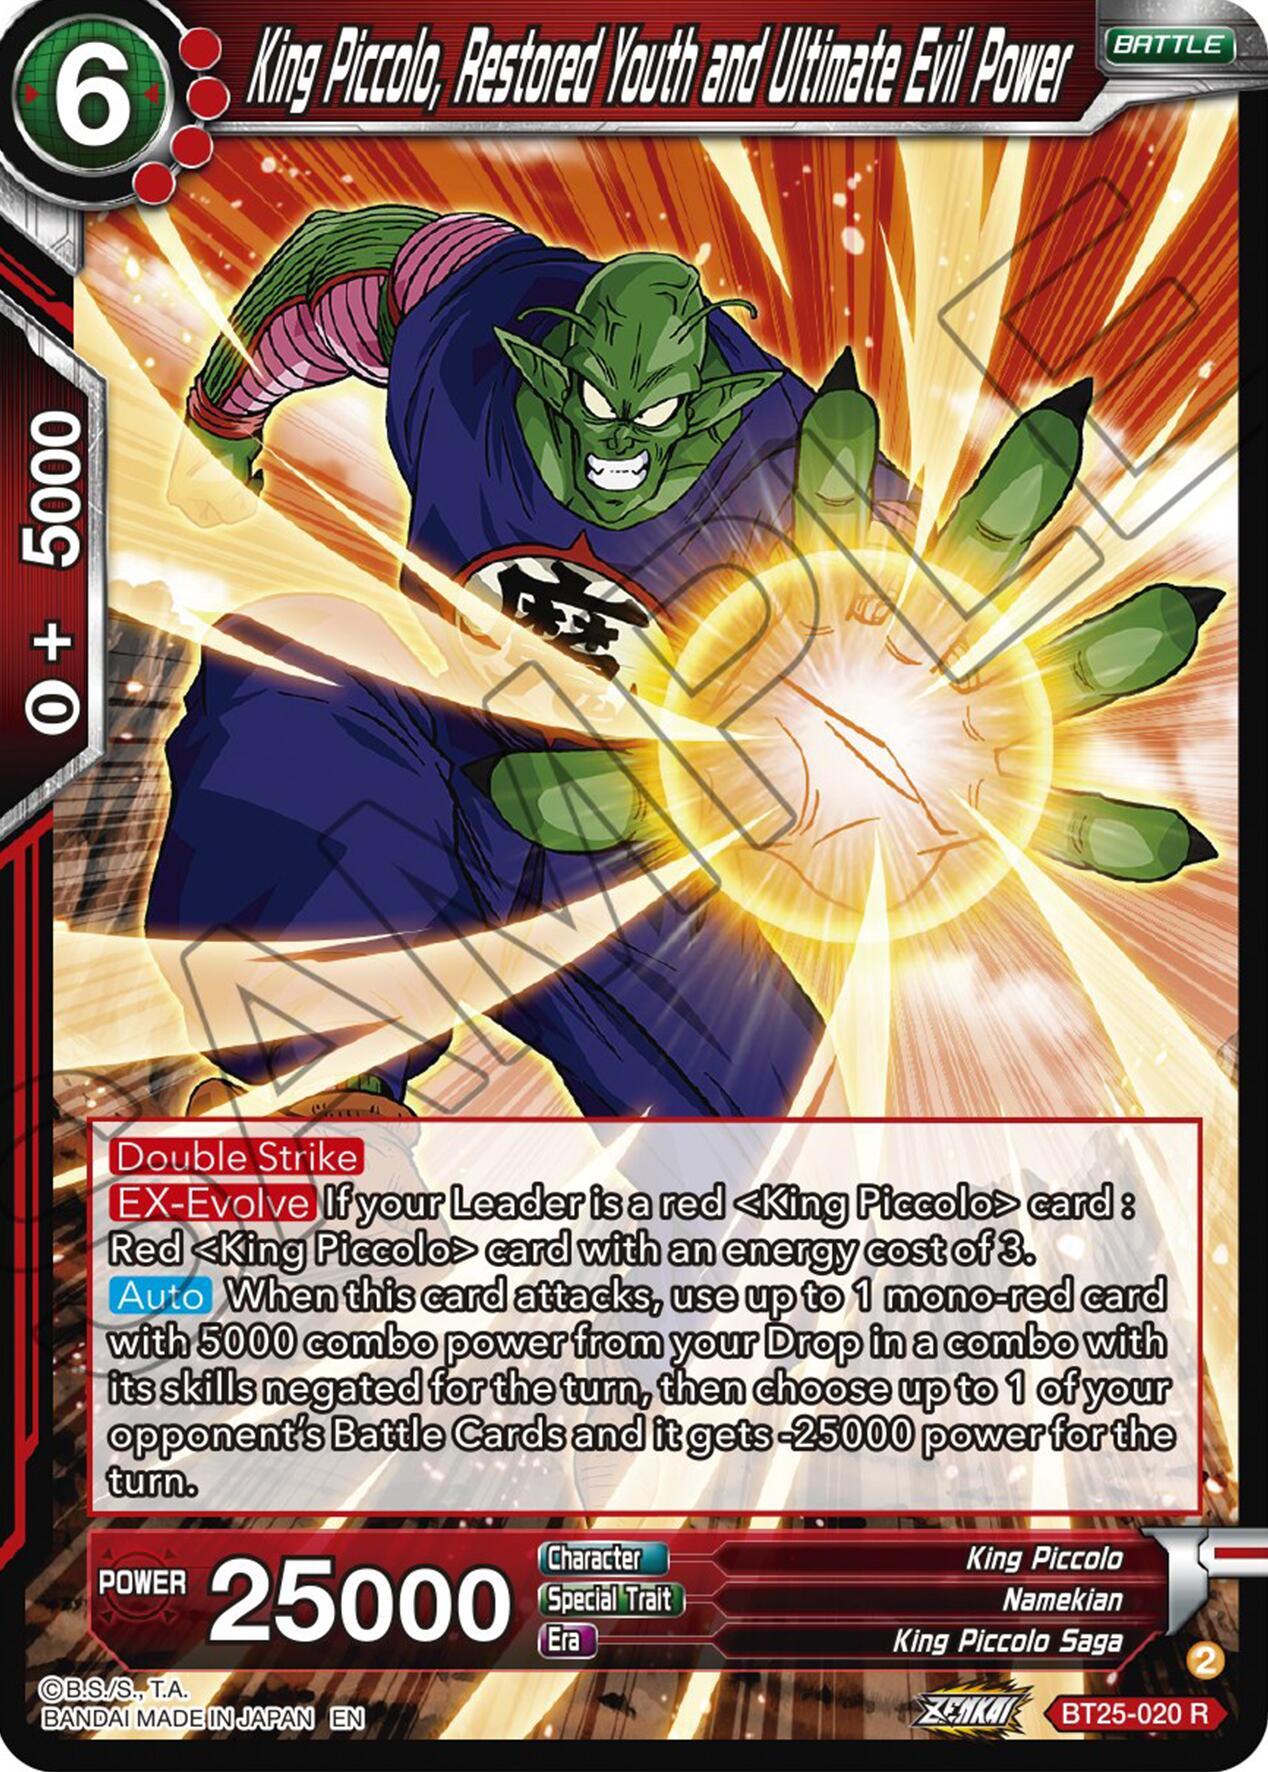 King Piccolo, Restored Youth and Ultimate Evil Power (BT25-020) [Legend of the Dragon Balls] | Amazing Games TCG